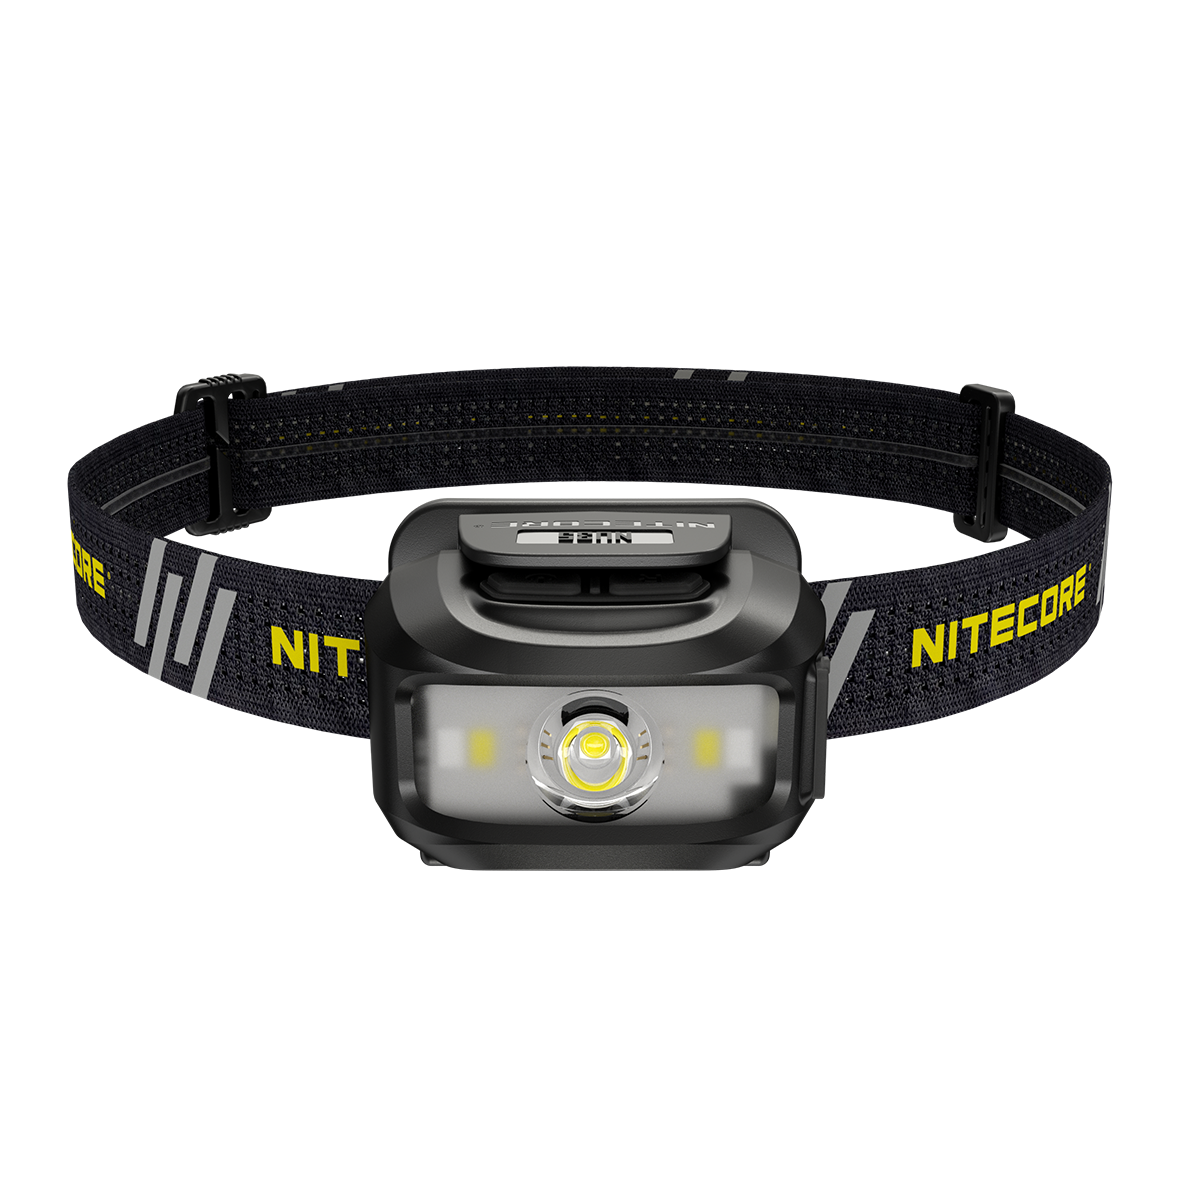 

NITECORE NU35 Dual Power Hybrids 460LM Powerful LED Headlamp USB-C Quick Charge Rechargeable Strong Floodlight Headlight